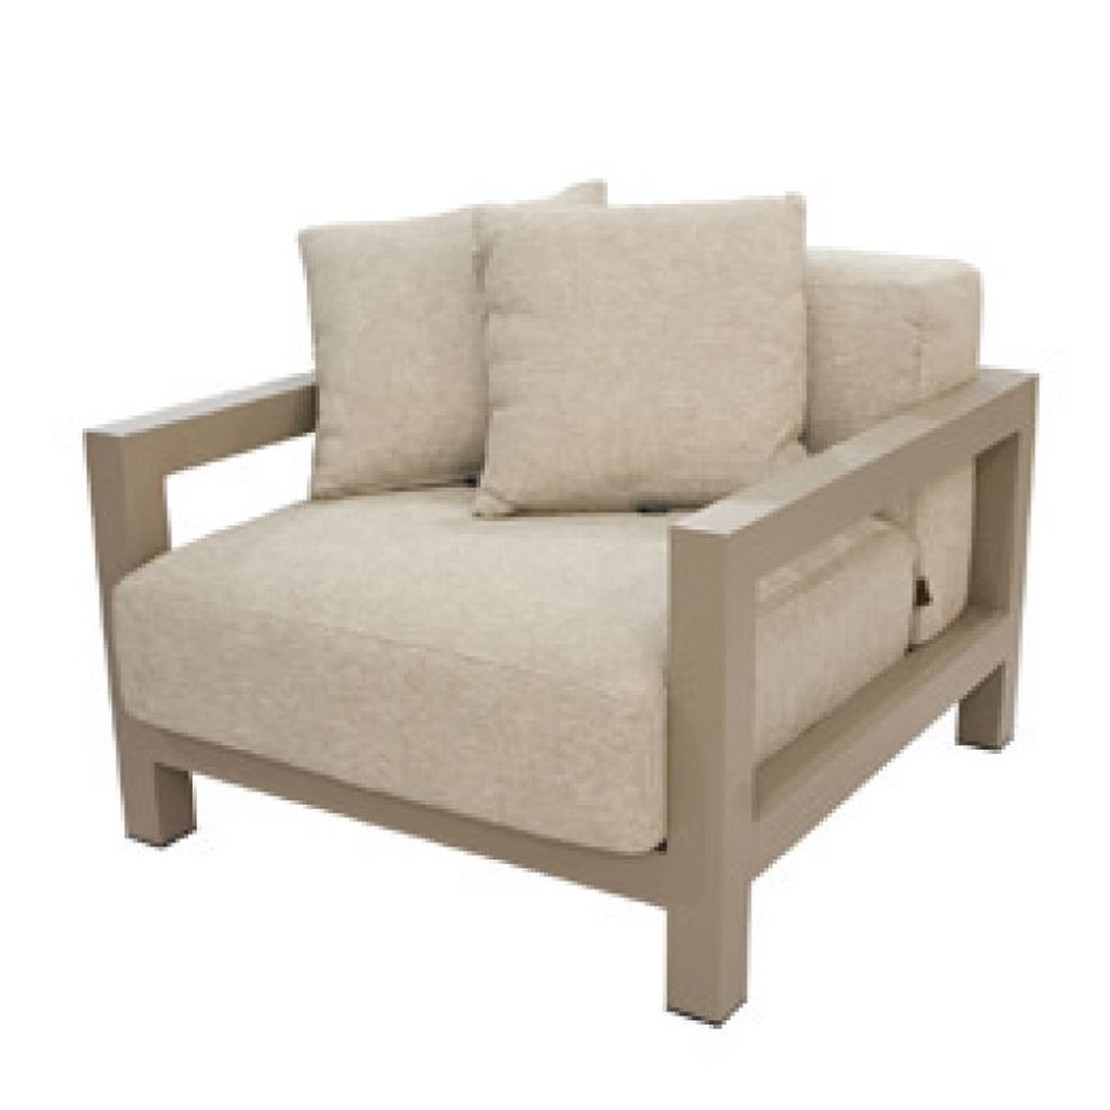 Raffinato living chair latte with 4 cushions